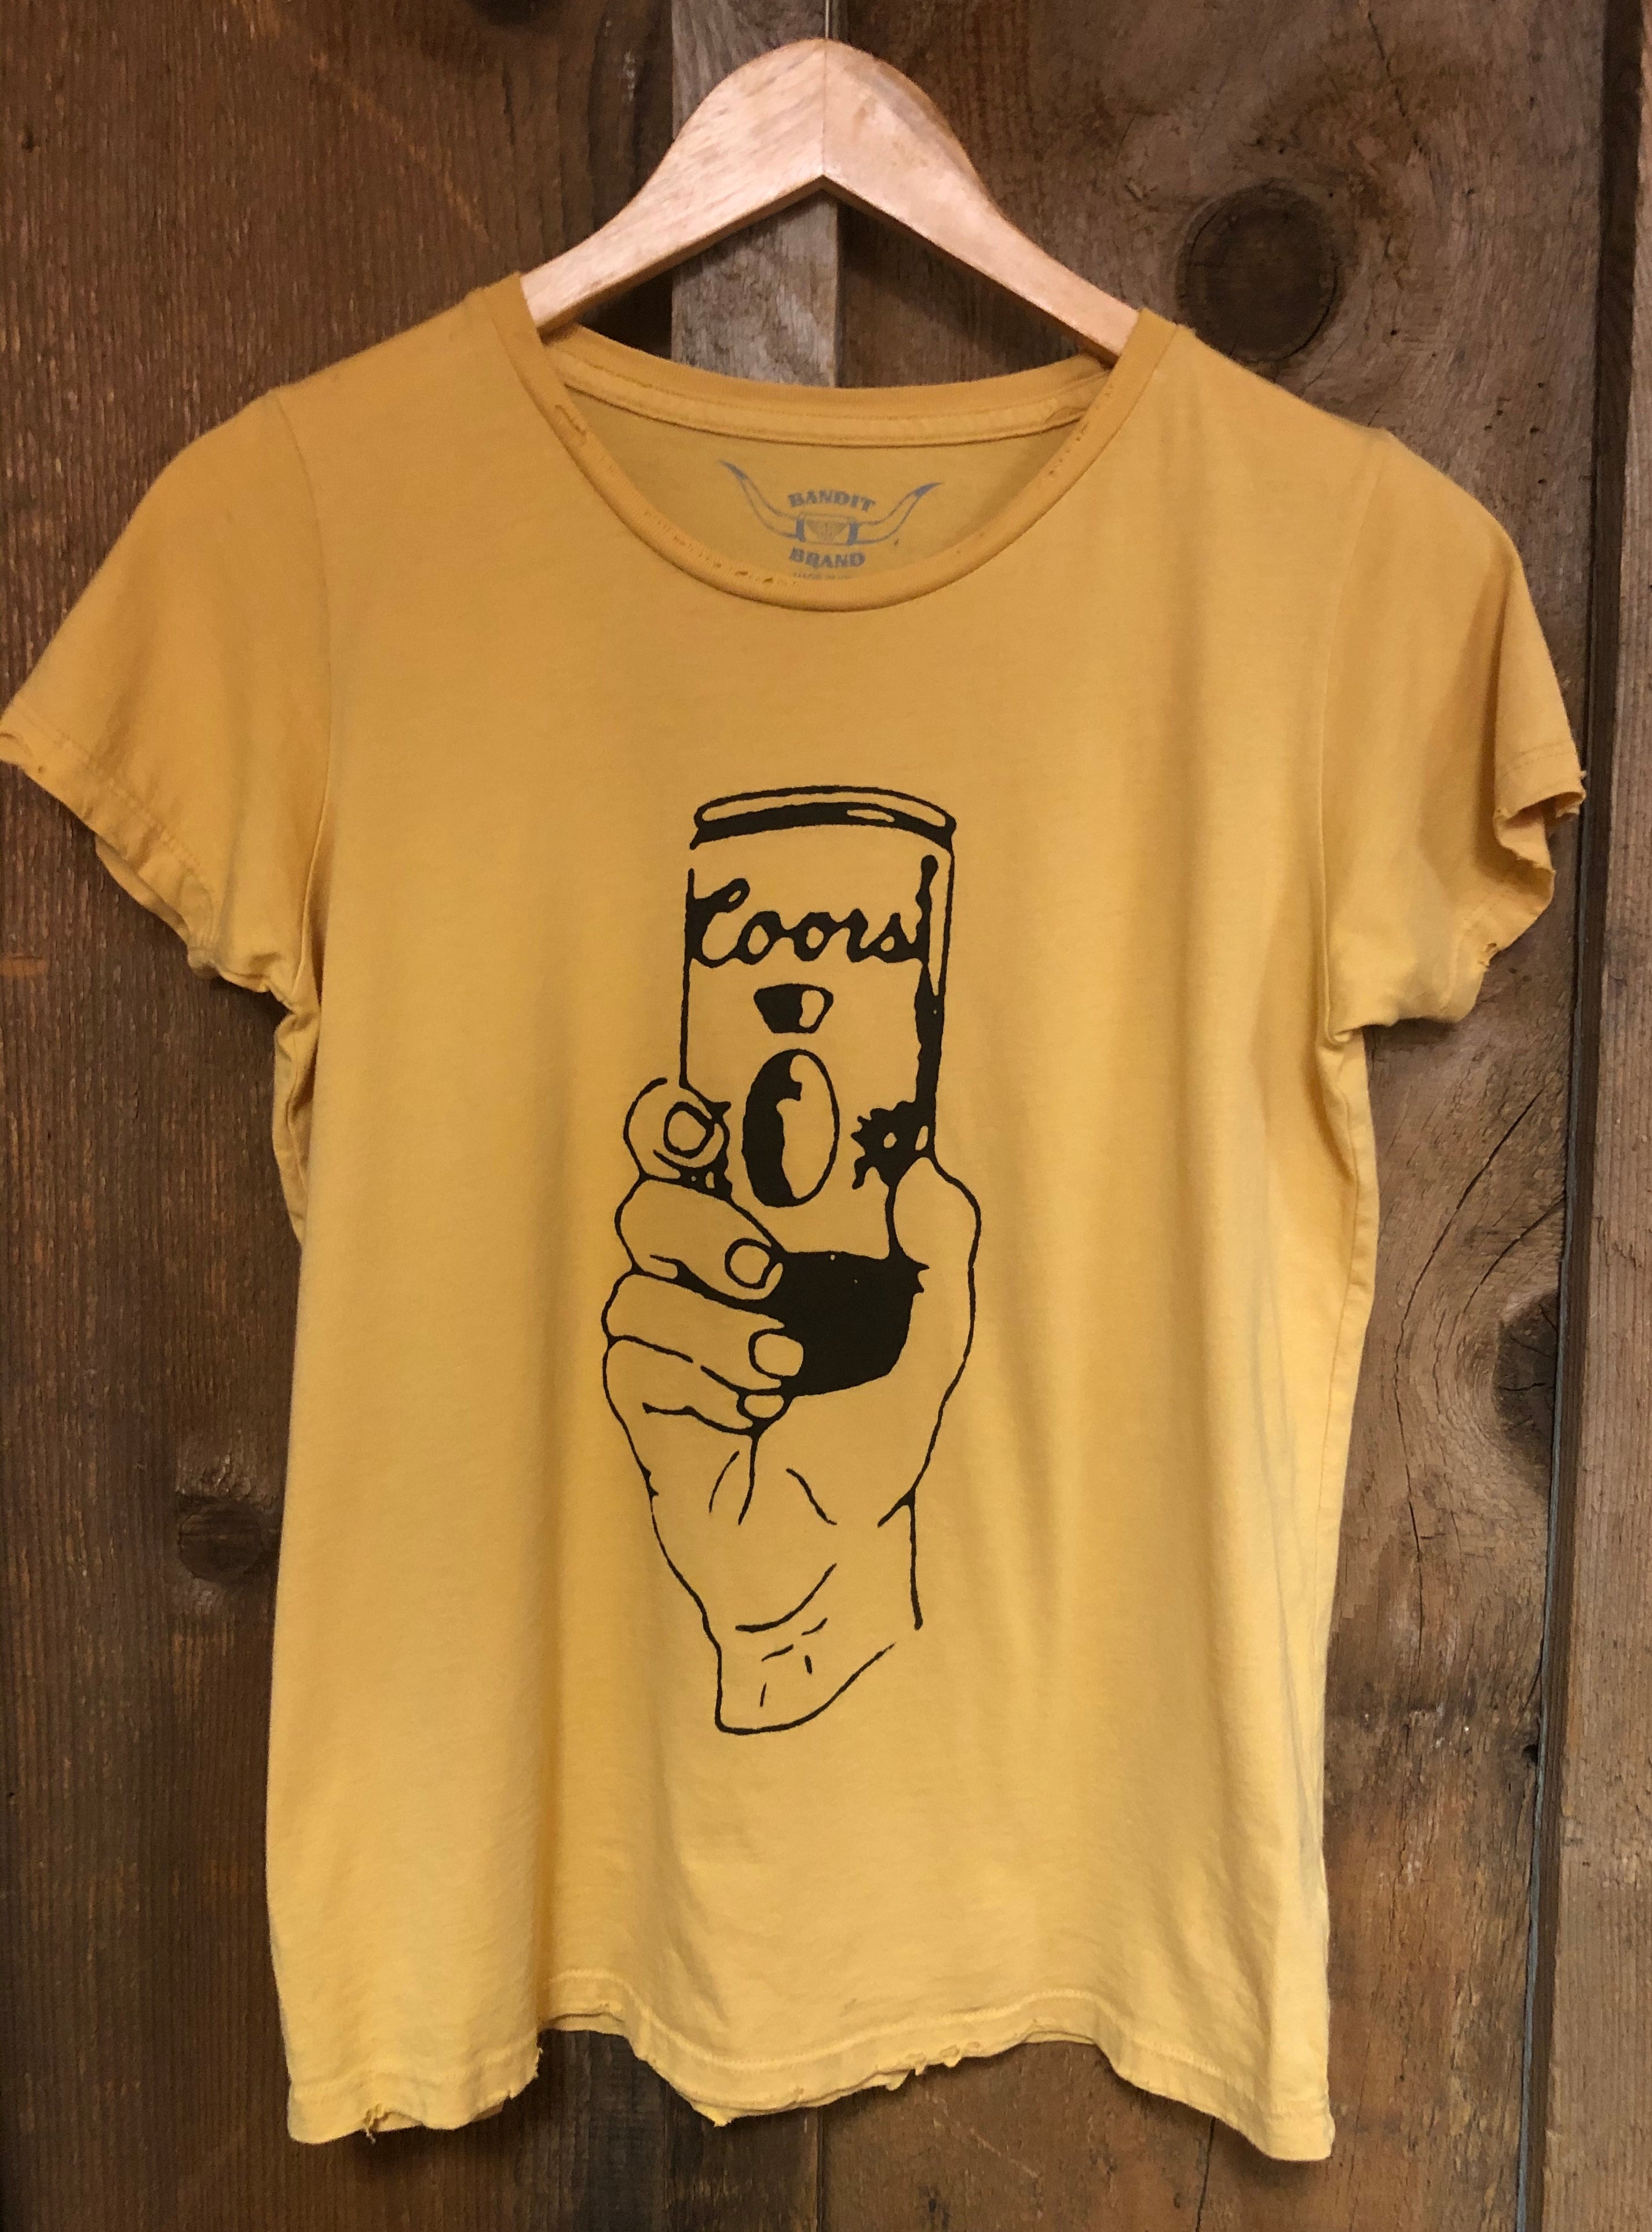 Coors Womens Tee Gold Dust/Blk